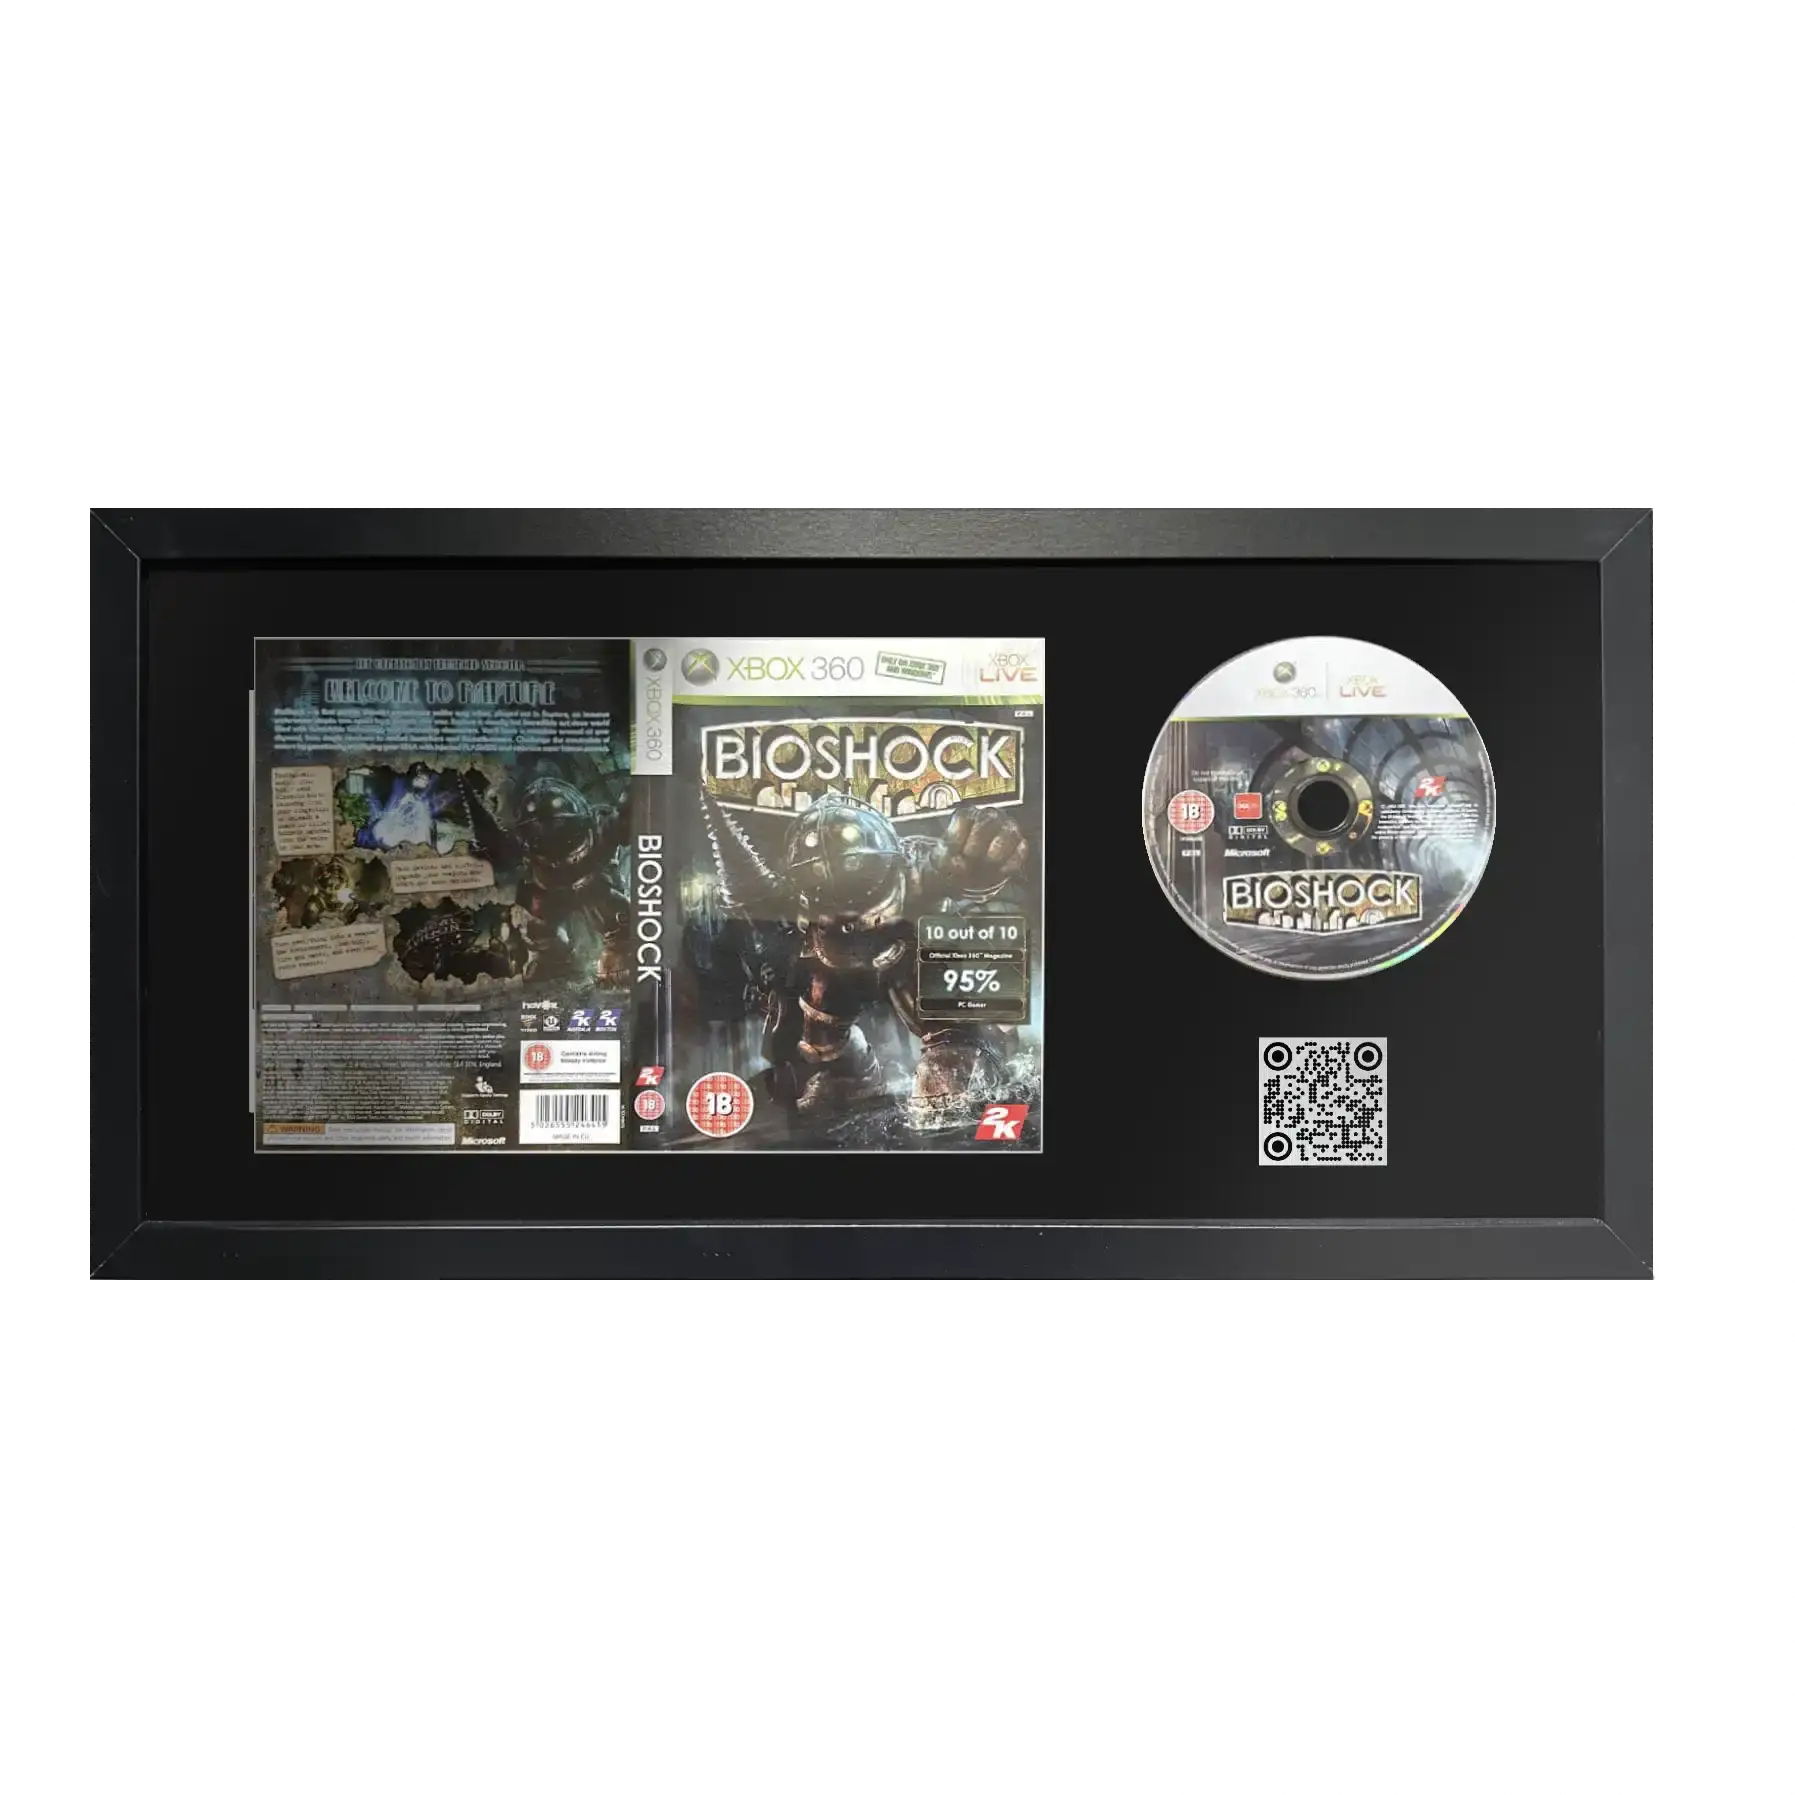 Bioshock game for Xbox 360 in a frame displayed with a QR code